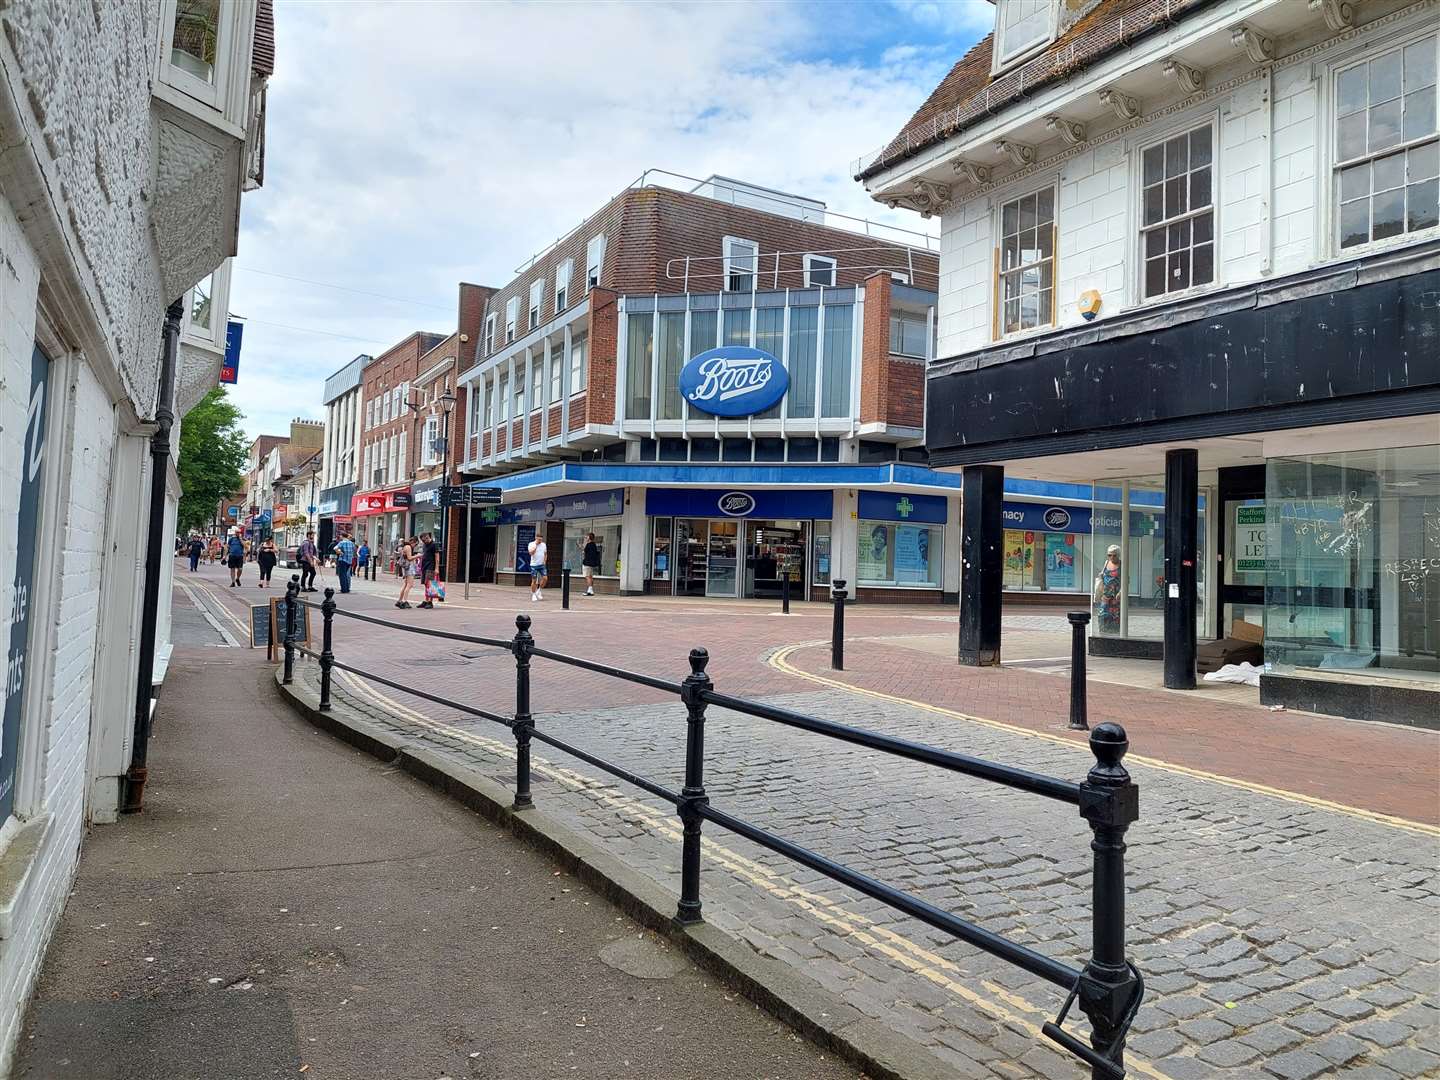 A dispersal order was brought in Ashford town centre after reports of a disturbance